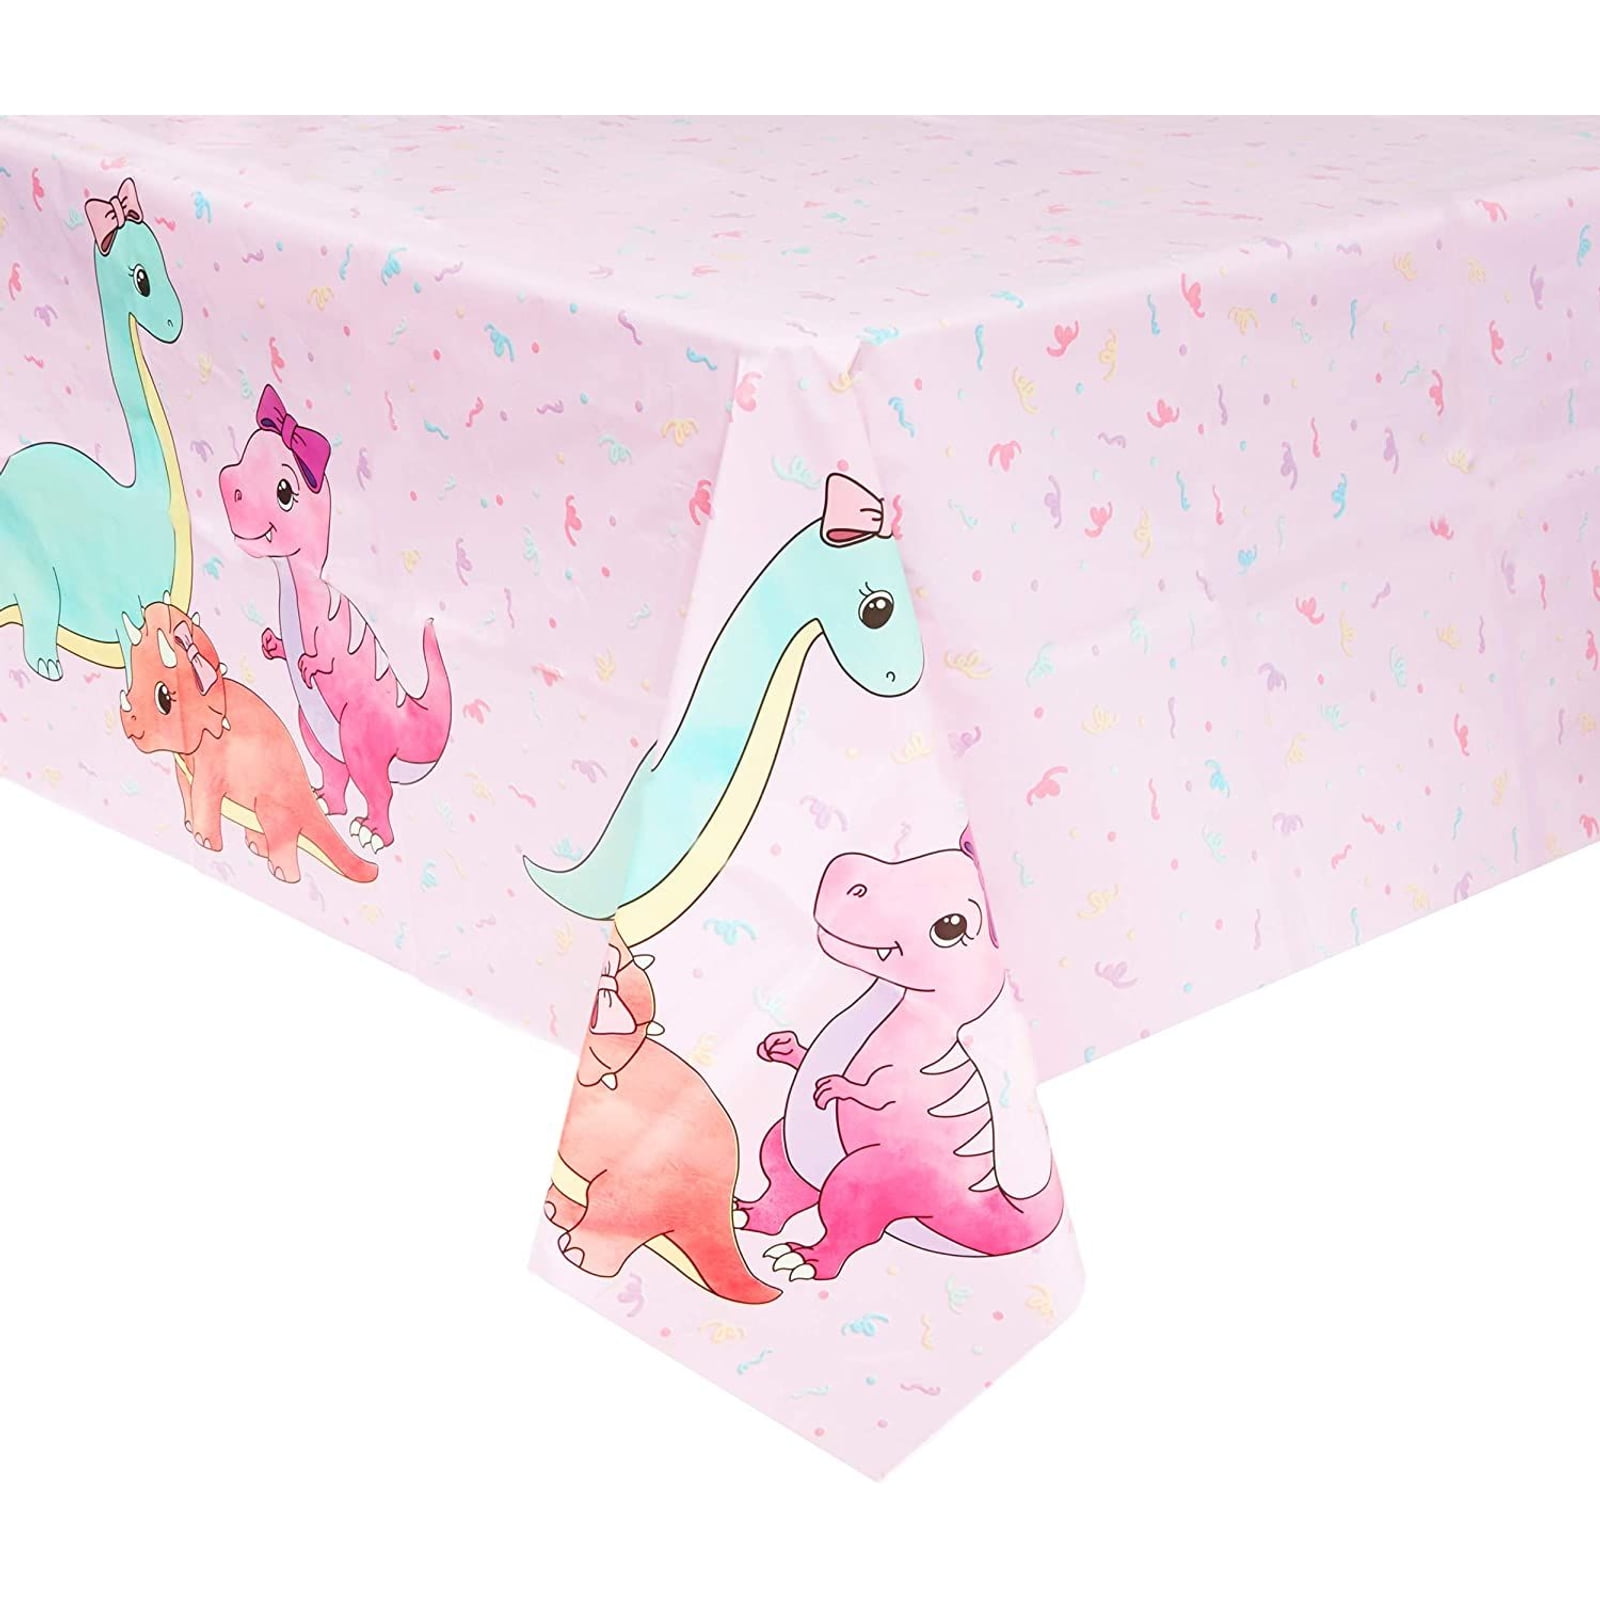 Decoration for Baby Shower Party Supplies Large 1 Piece 54'' x 108'' Disposable Dino Theme Birthday Party Table Cover Watercolor Printed Dinosaur Party Tablecloth Waterproof Picnic Table Cloth 